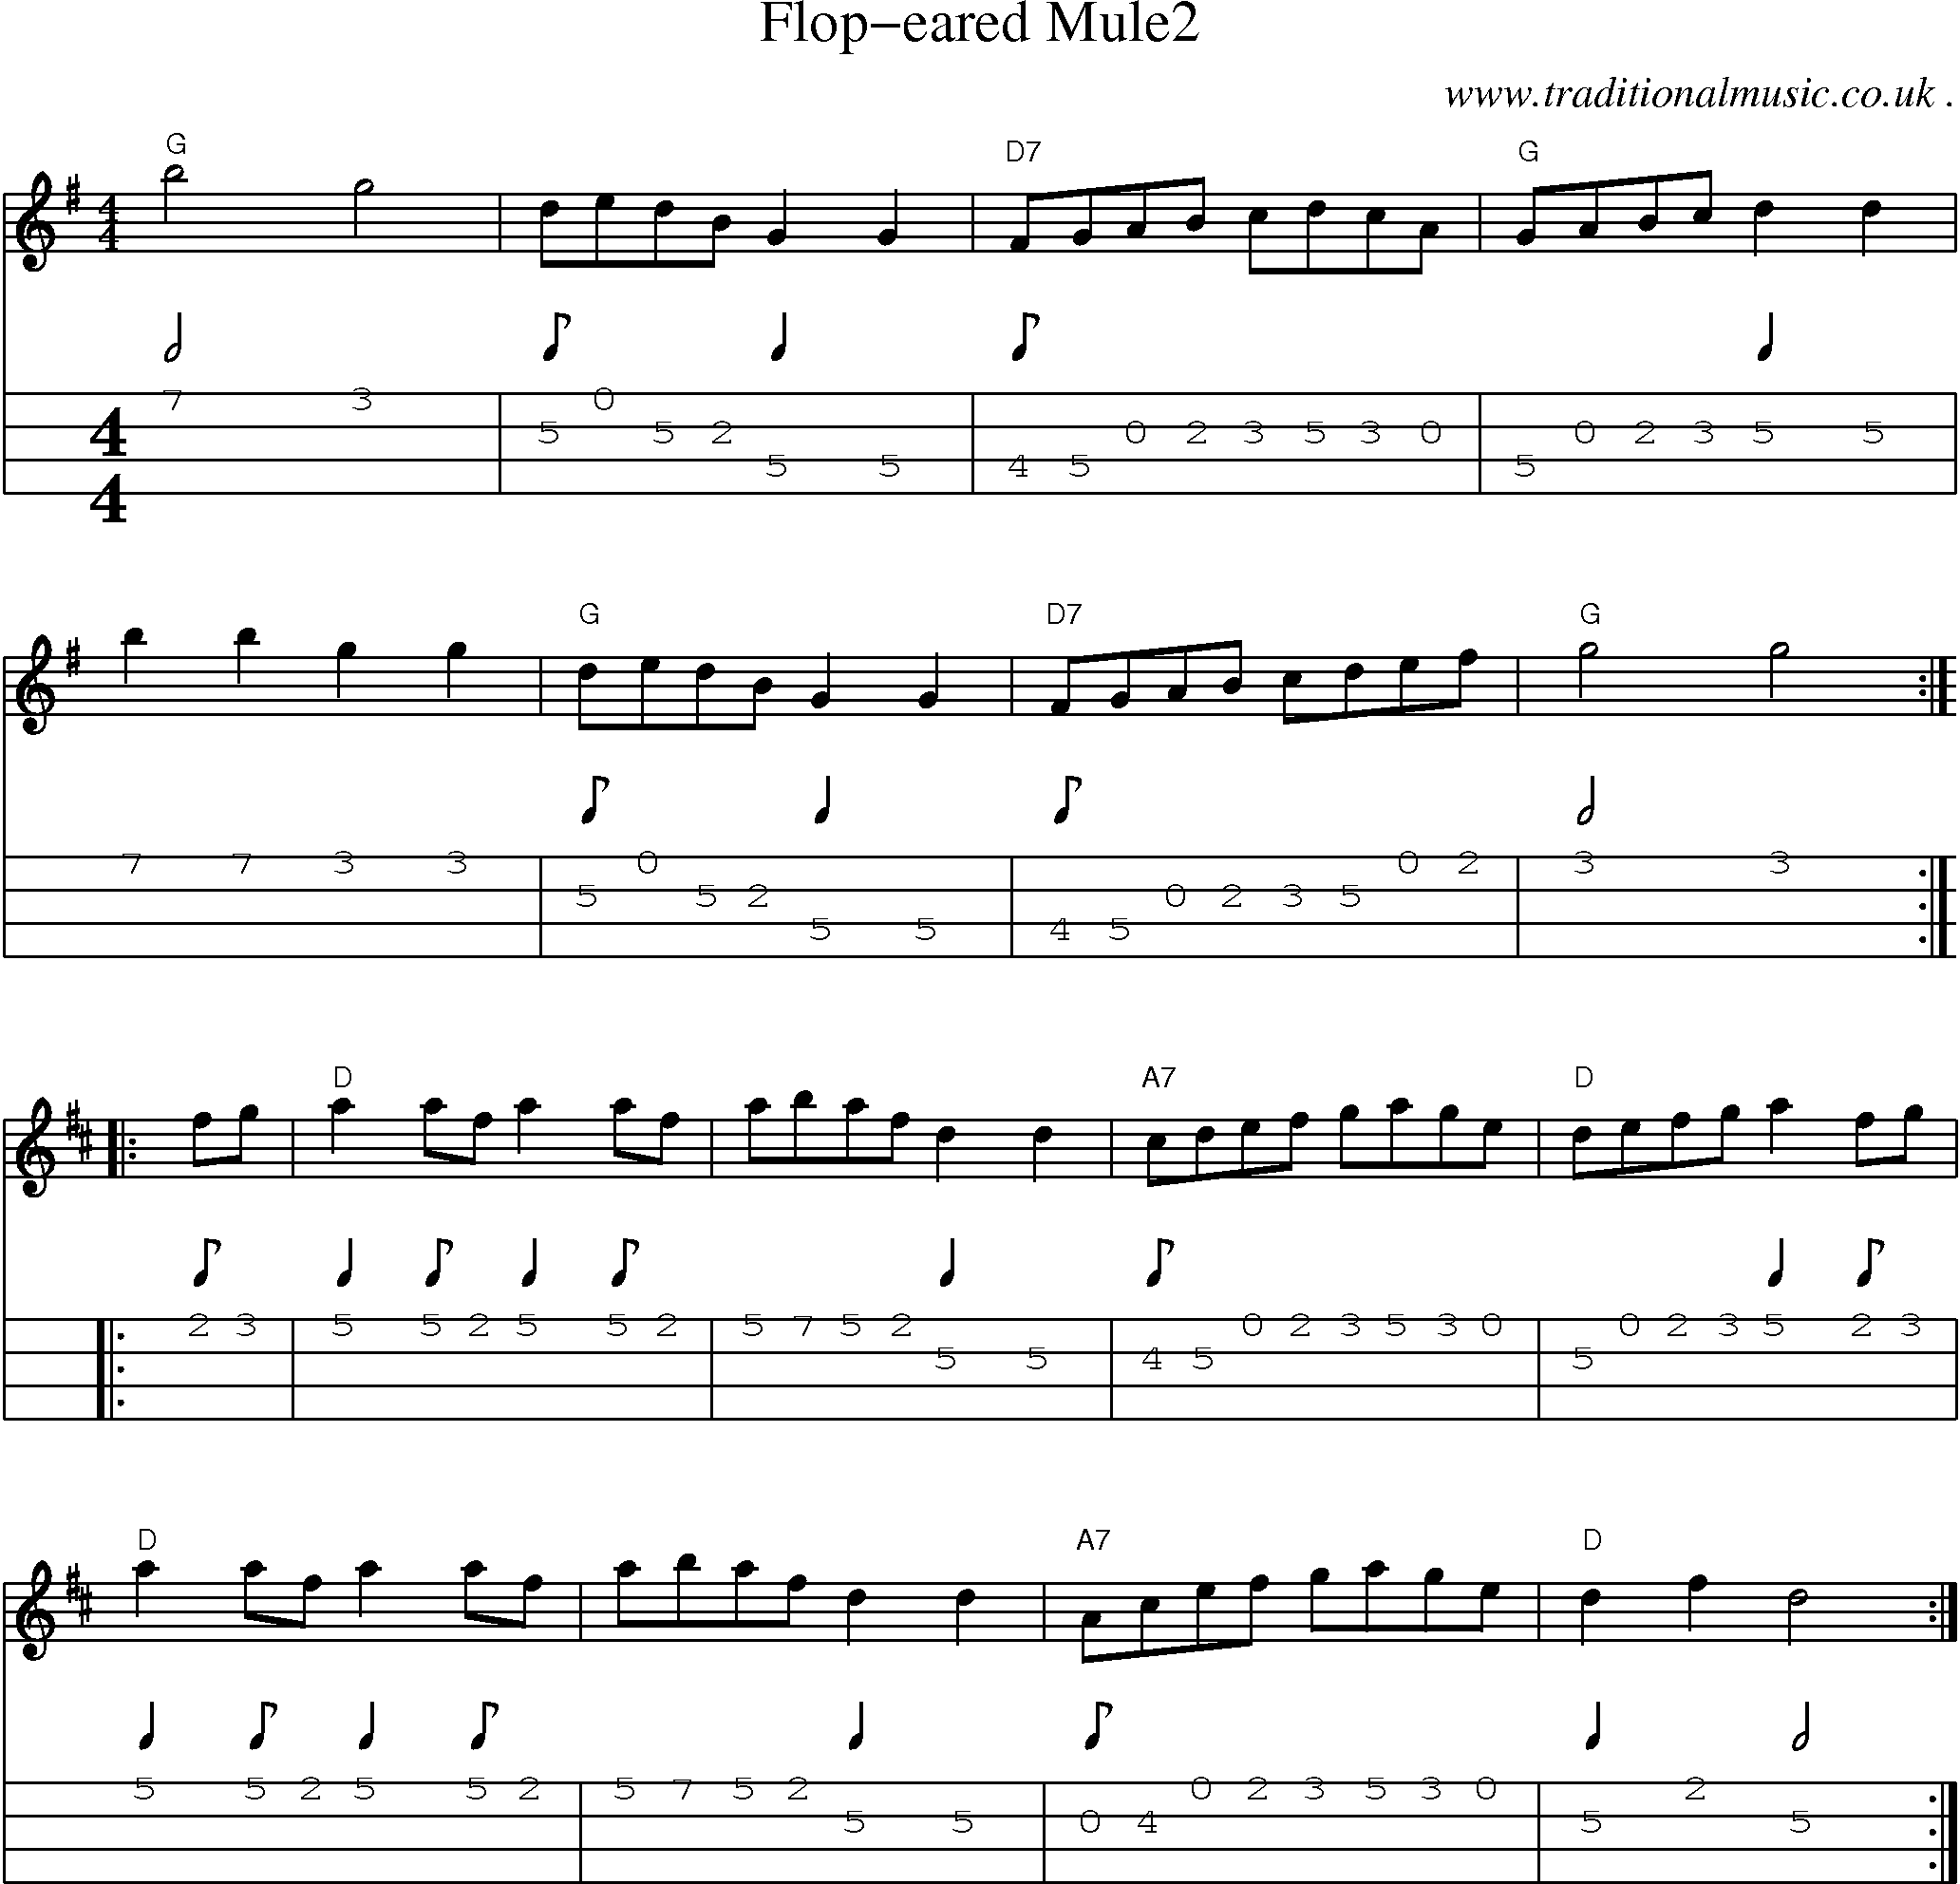 Music Score and Mandolin Tabs for Flop-eared Mule2